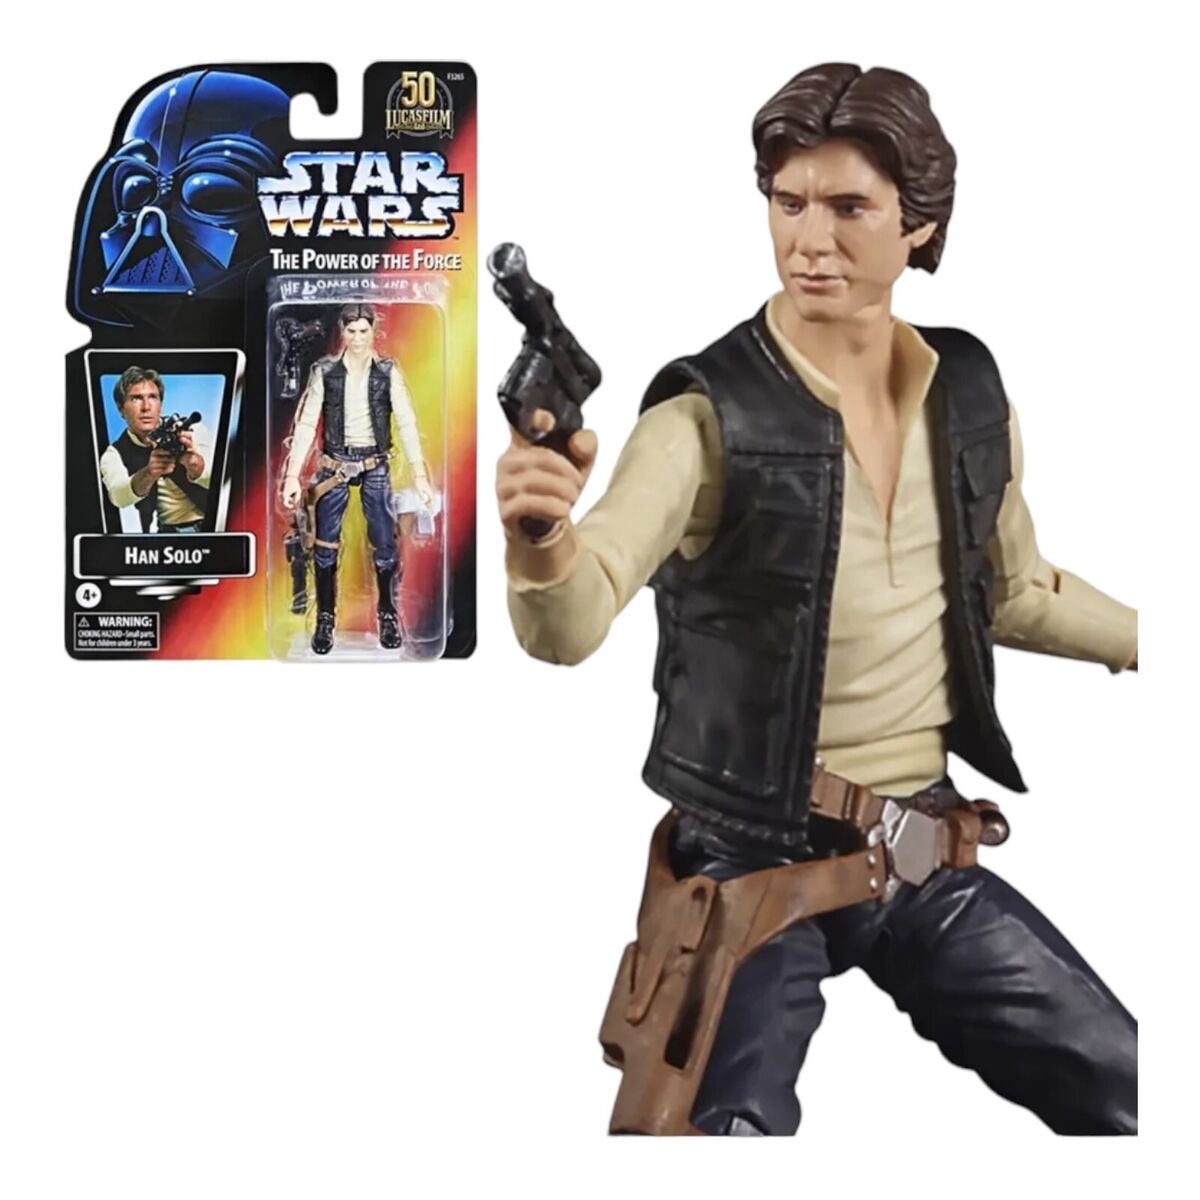 Star Wars Power Of The Force Retro Han Solo